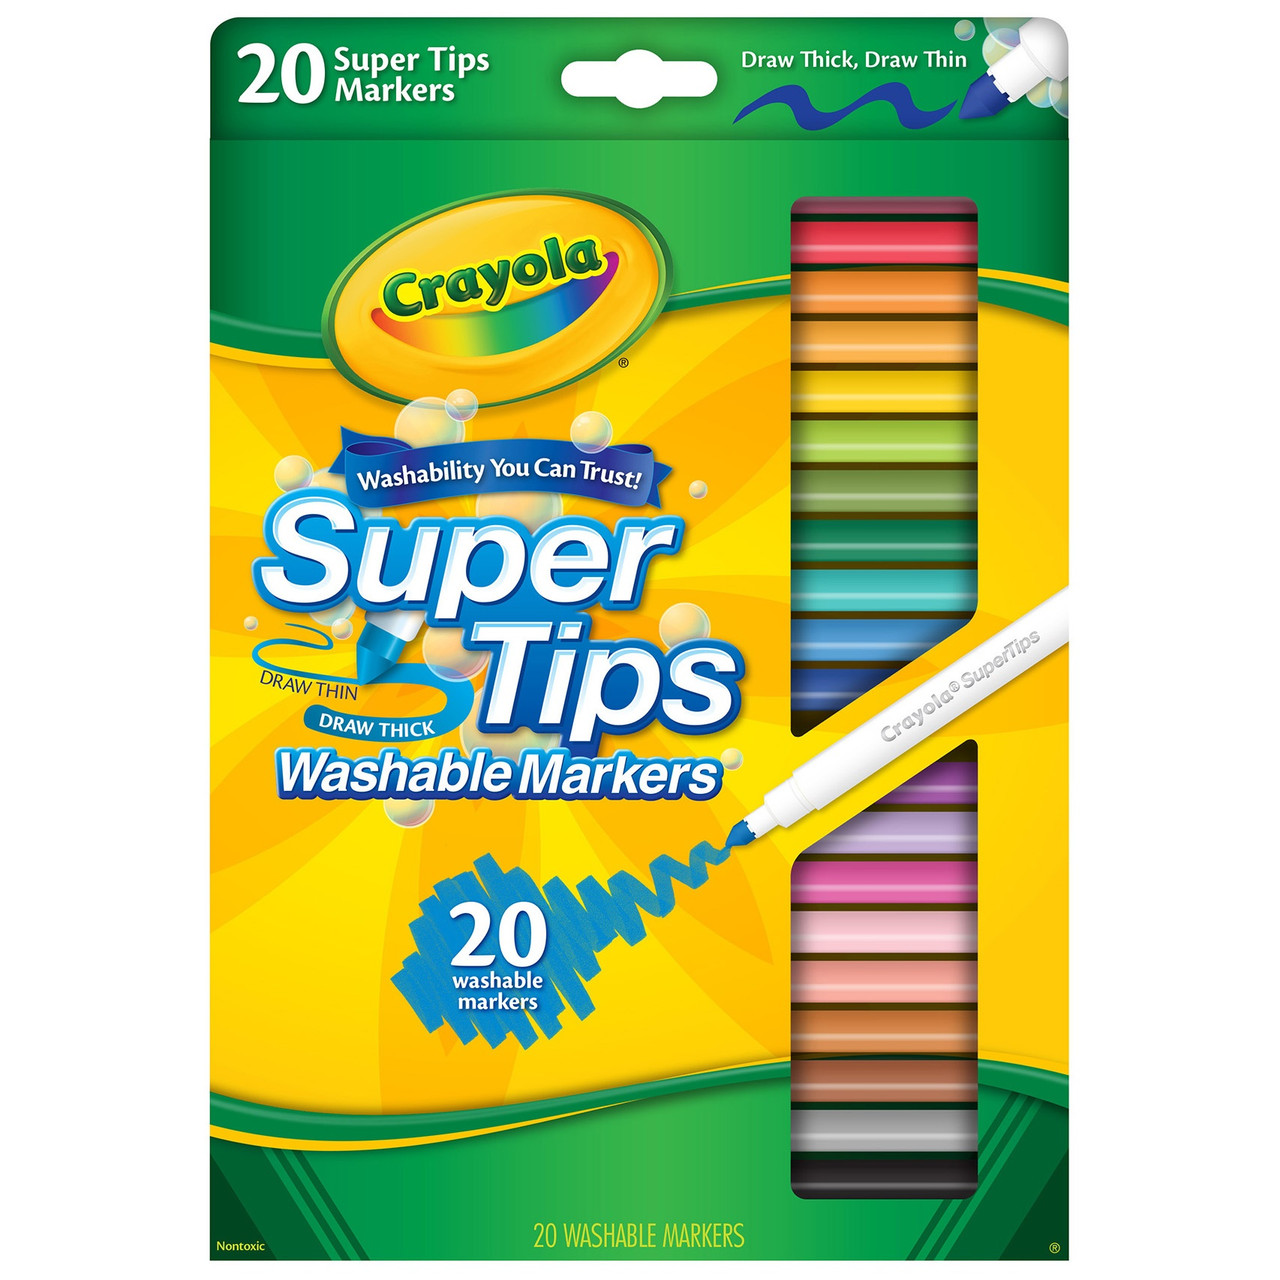 Crayola Ultra-Clean Washable Markers, Broad Line, Assorted Colors, 12/Box  (58-7812)